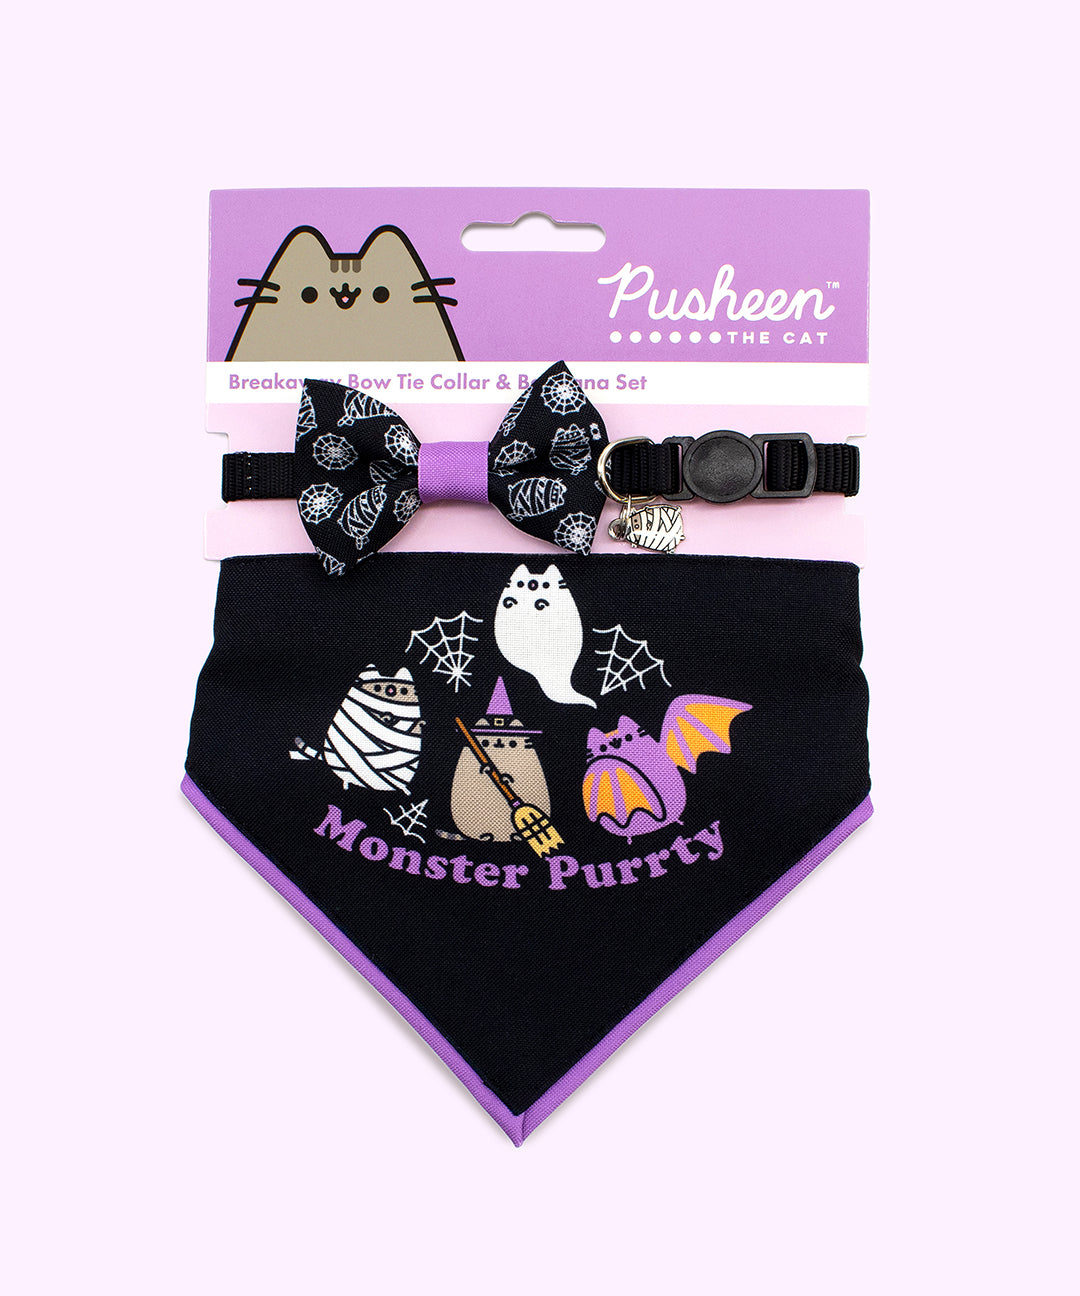 Pusheen pet collar and bandana set in packaging that states that the set includes breakaway collars. The bowtie and bandana graphic are displayed at the front. 